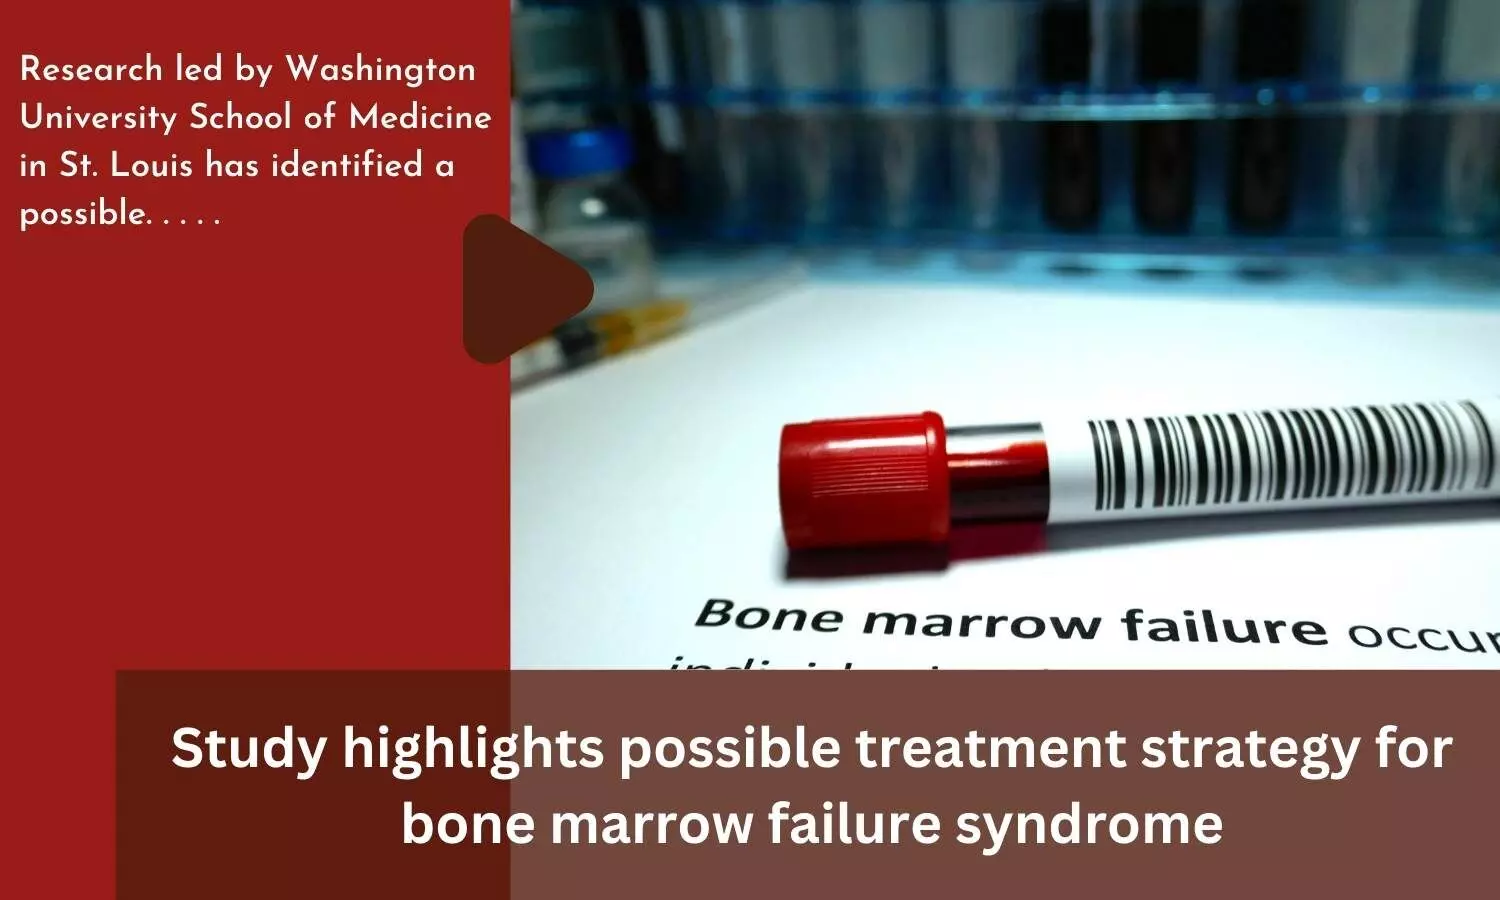 Study highlights possible treatment strategy for bone marrow failure syndrome